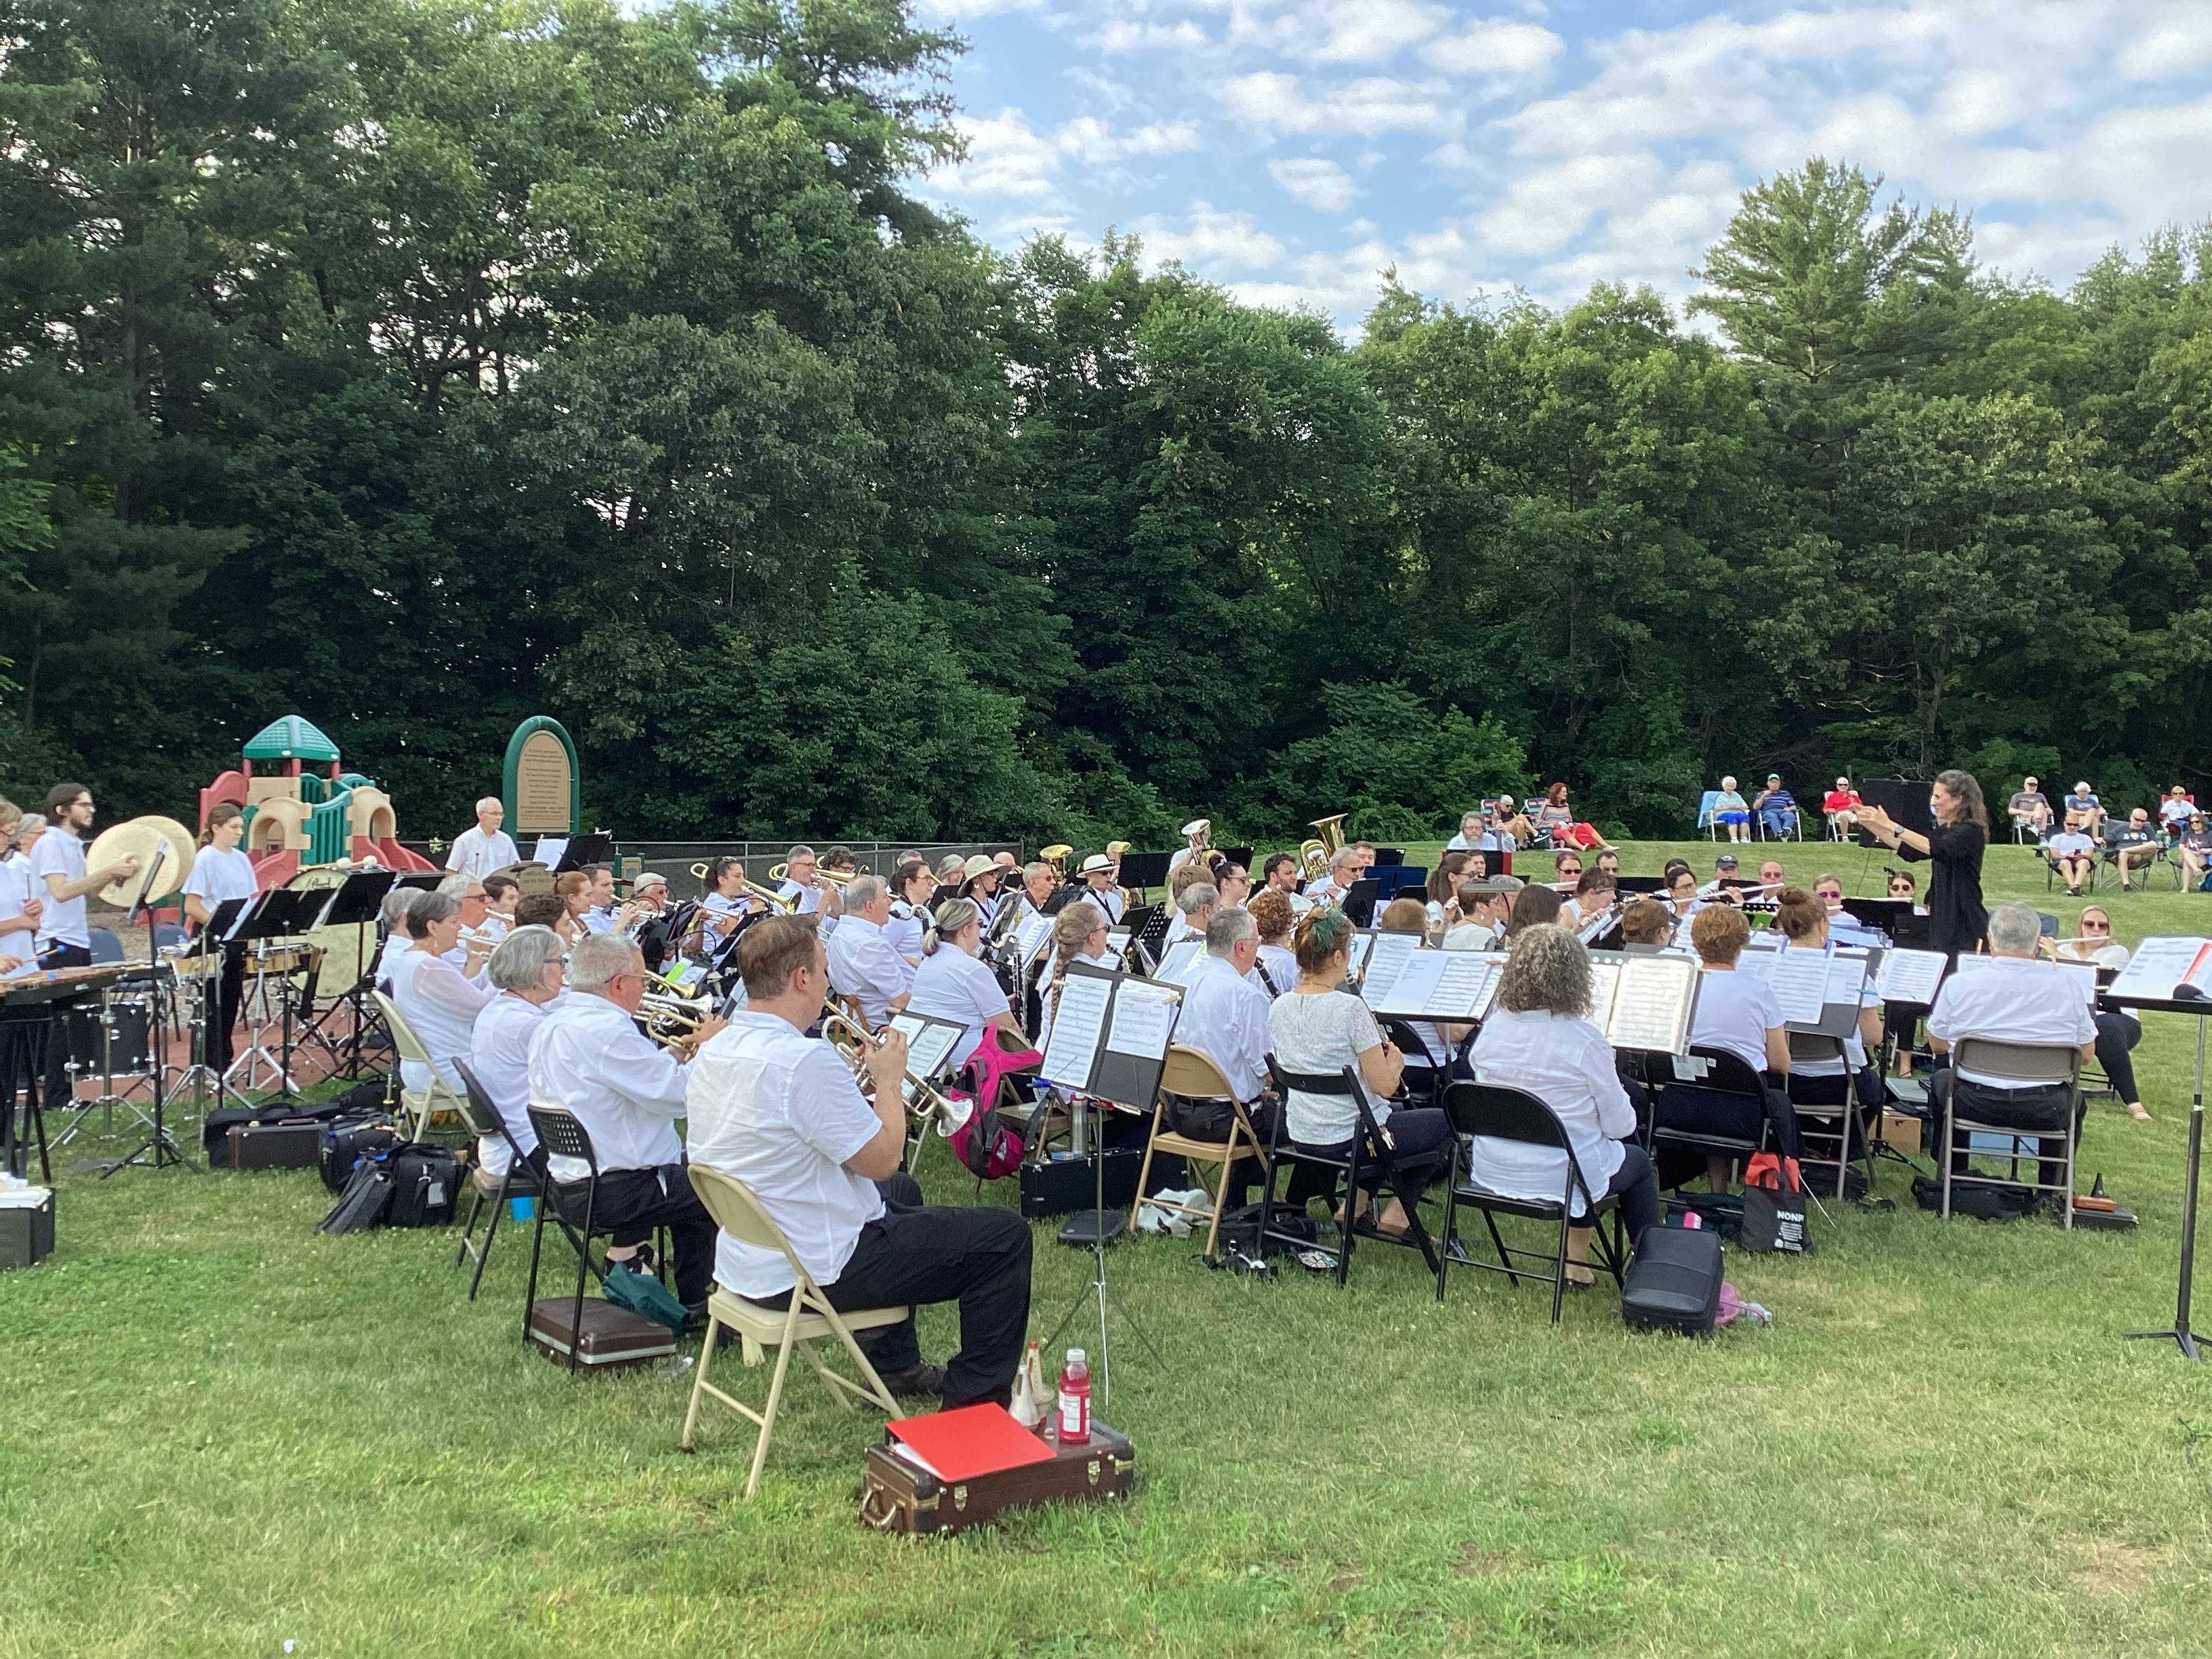 Windham Concert Band Comes to Celebrate a Somers 4th